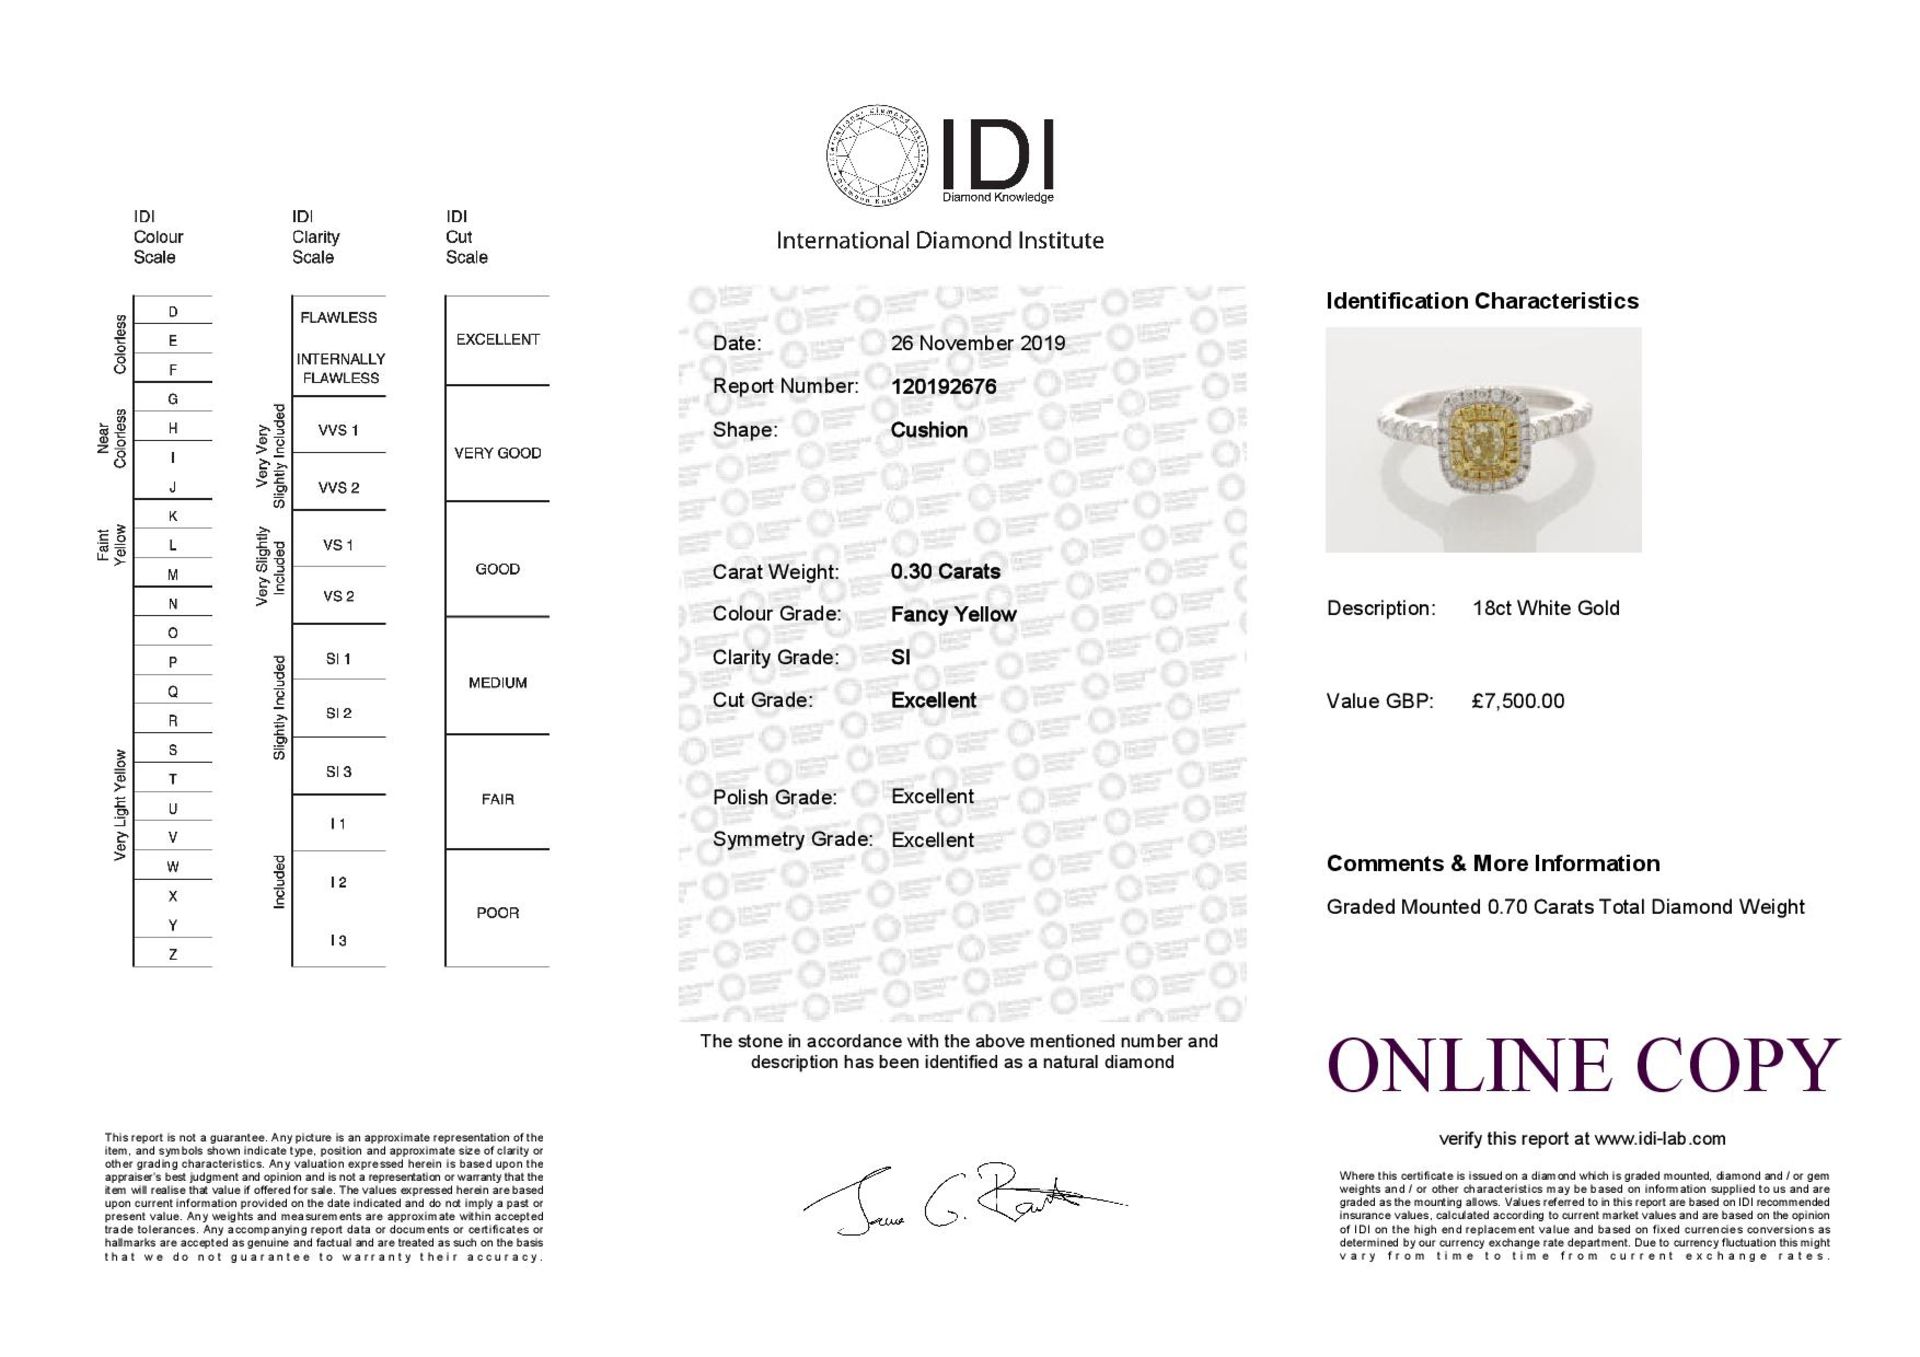 18ct White Gold Single Stone With Halo Setting Ring (0.30) 0.70 Carats - Valued by IDI £7,500.00 - - Image 5 of 5